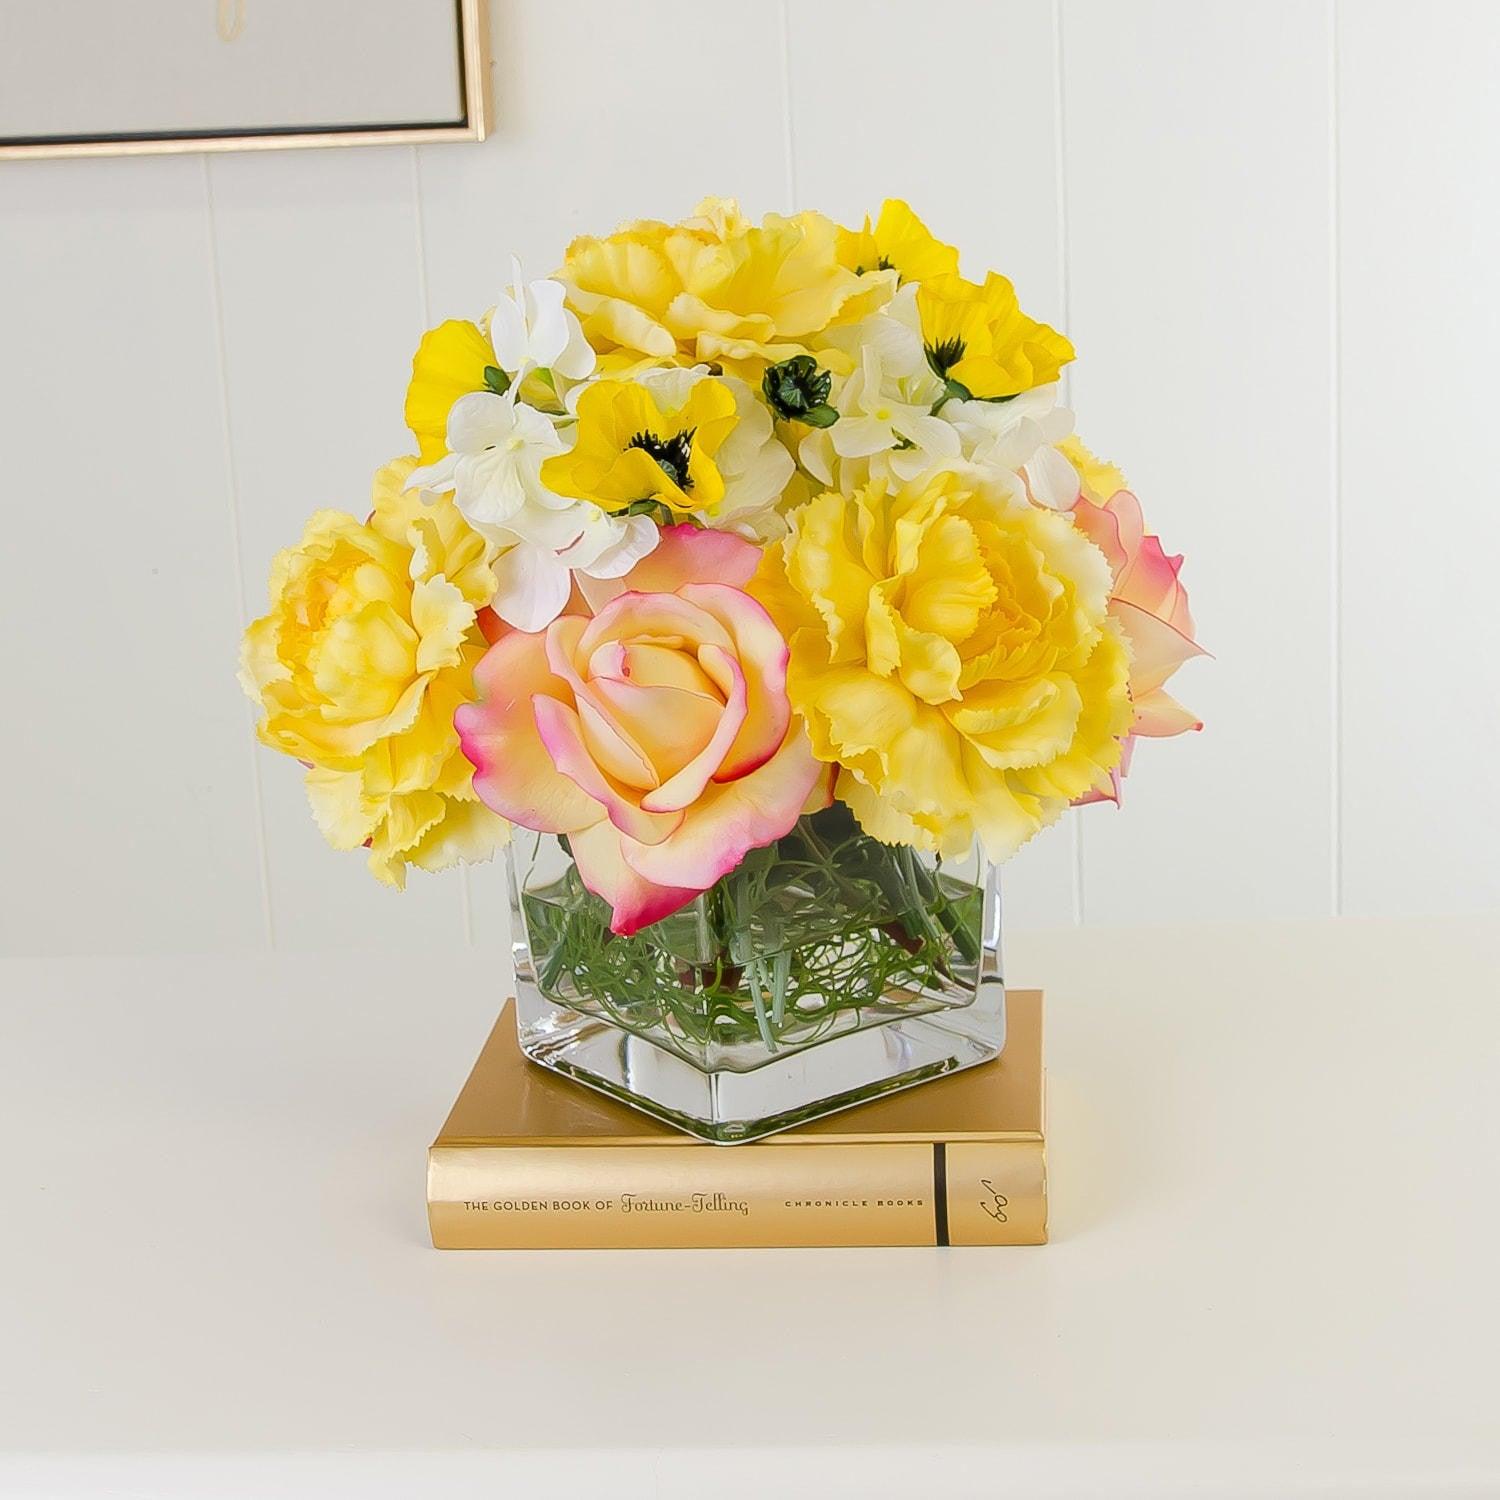 Real Touch Yellow Roses Carnation Hydrangeas Arrangement - Flovery